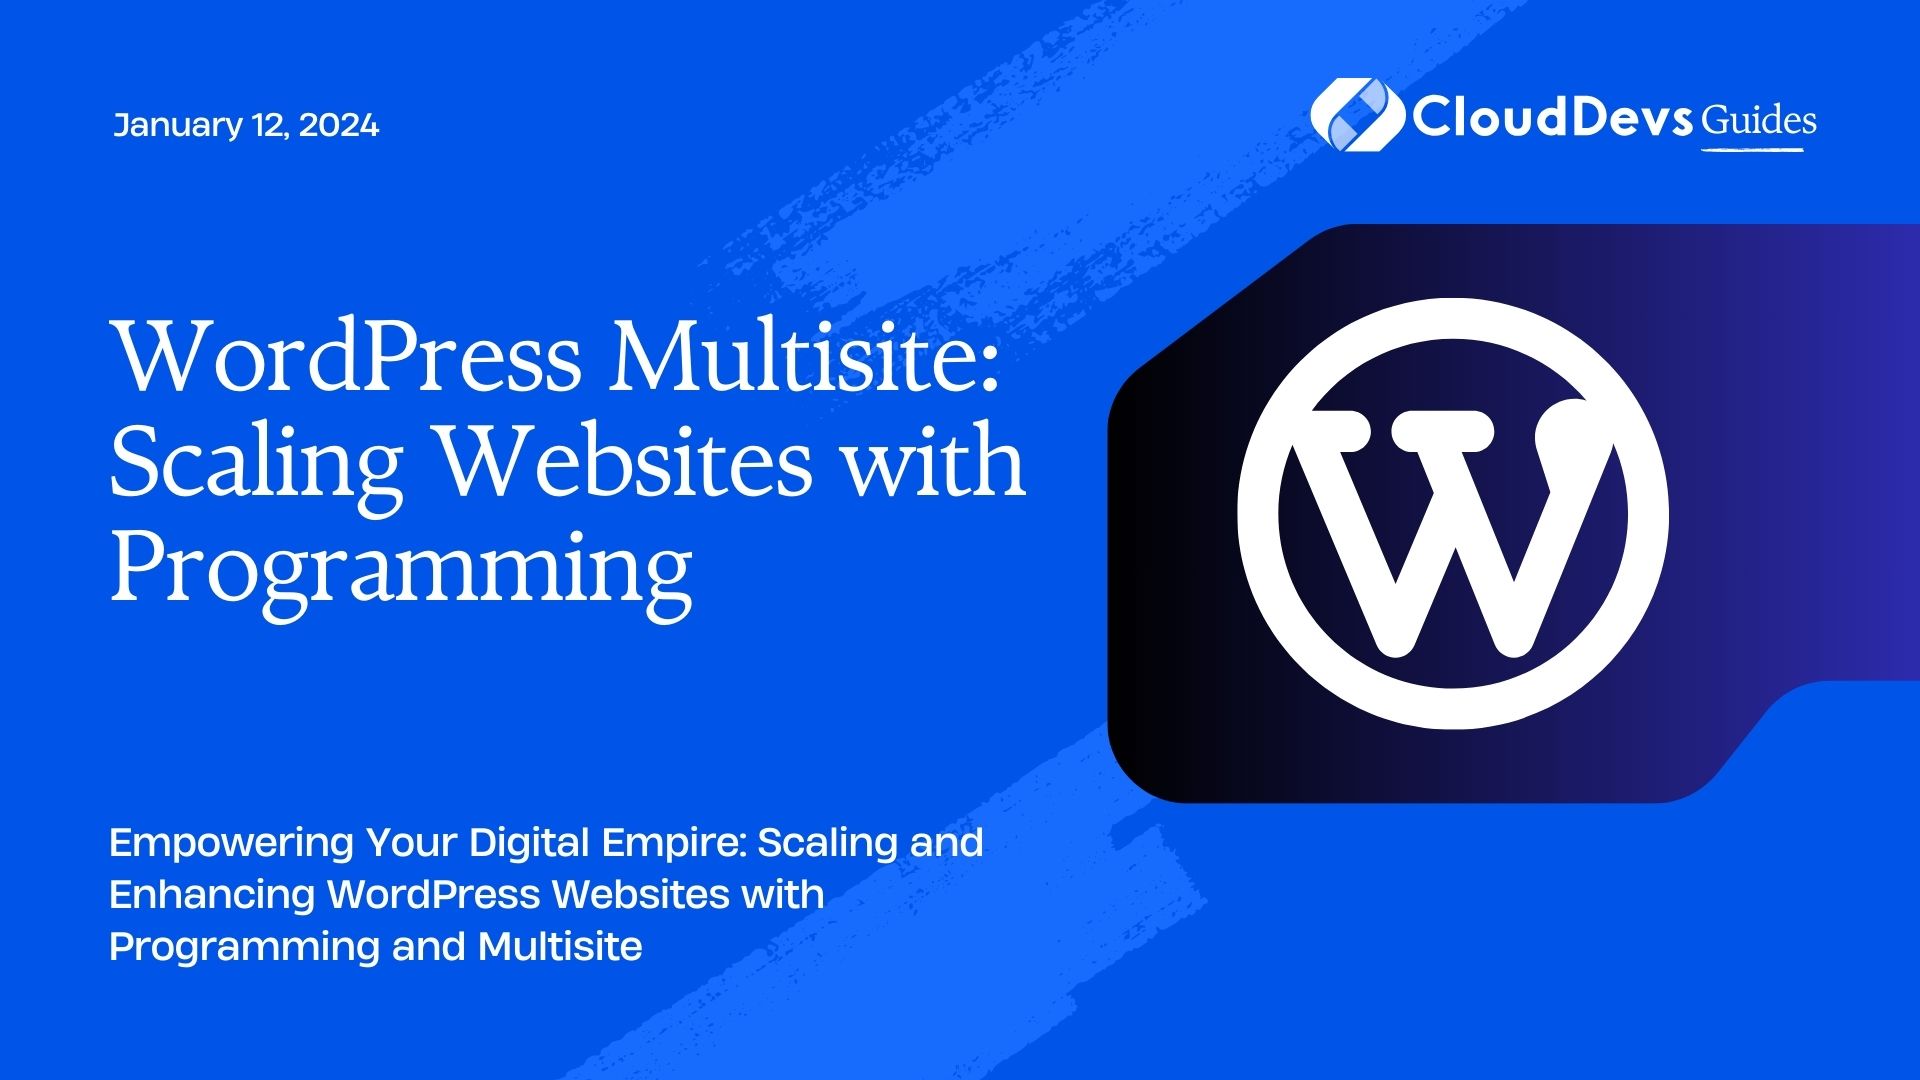 WordPress Multisite: Scaling Websites with Programming